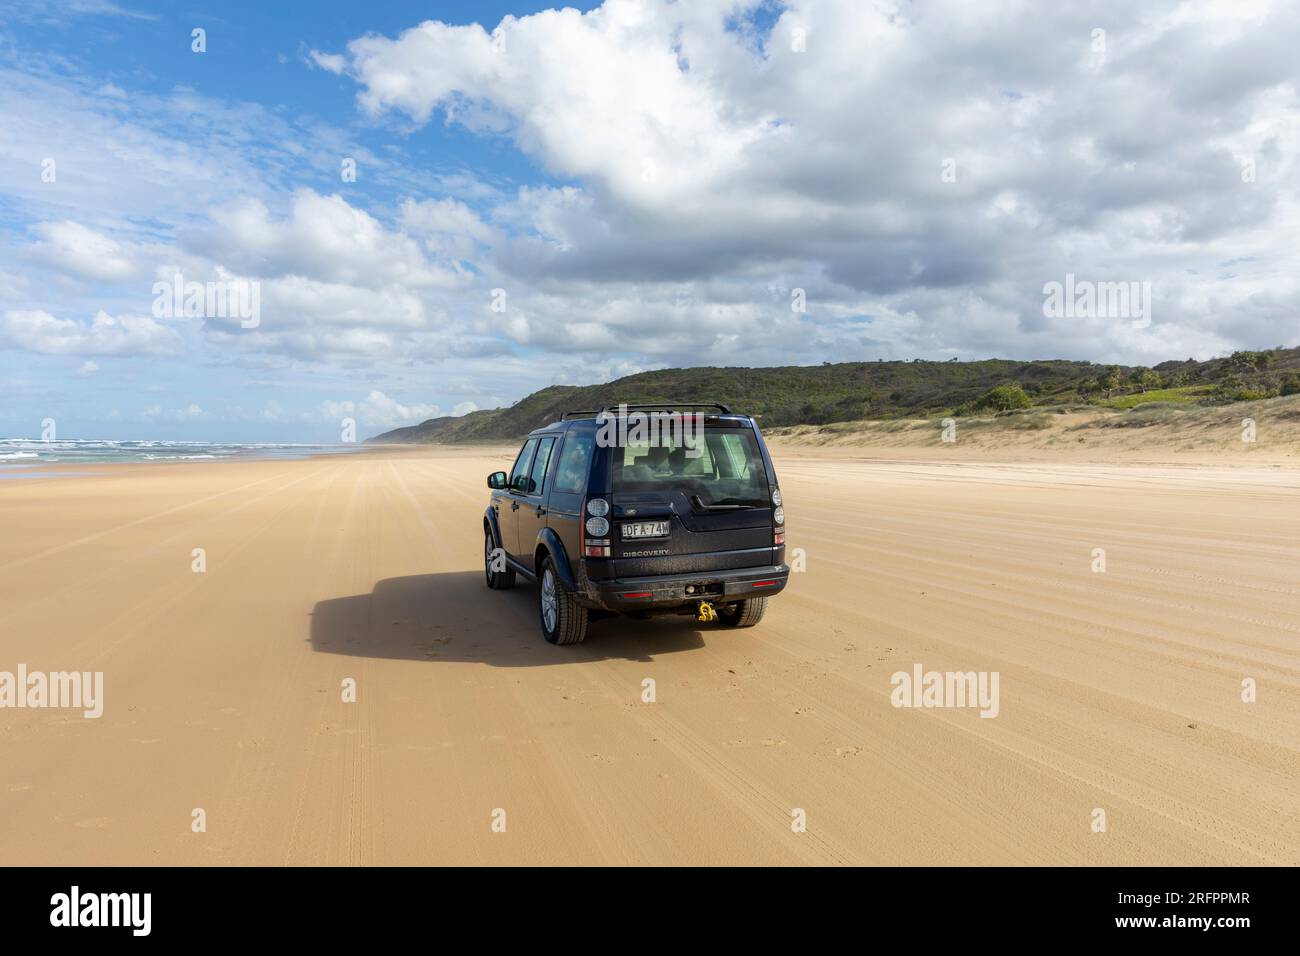 75 mile beach on Fraser Island K'gari, Land Rover Discovery 2016 model driving along sand highway, property released, Queensland,Australia Stock Photo